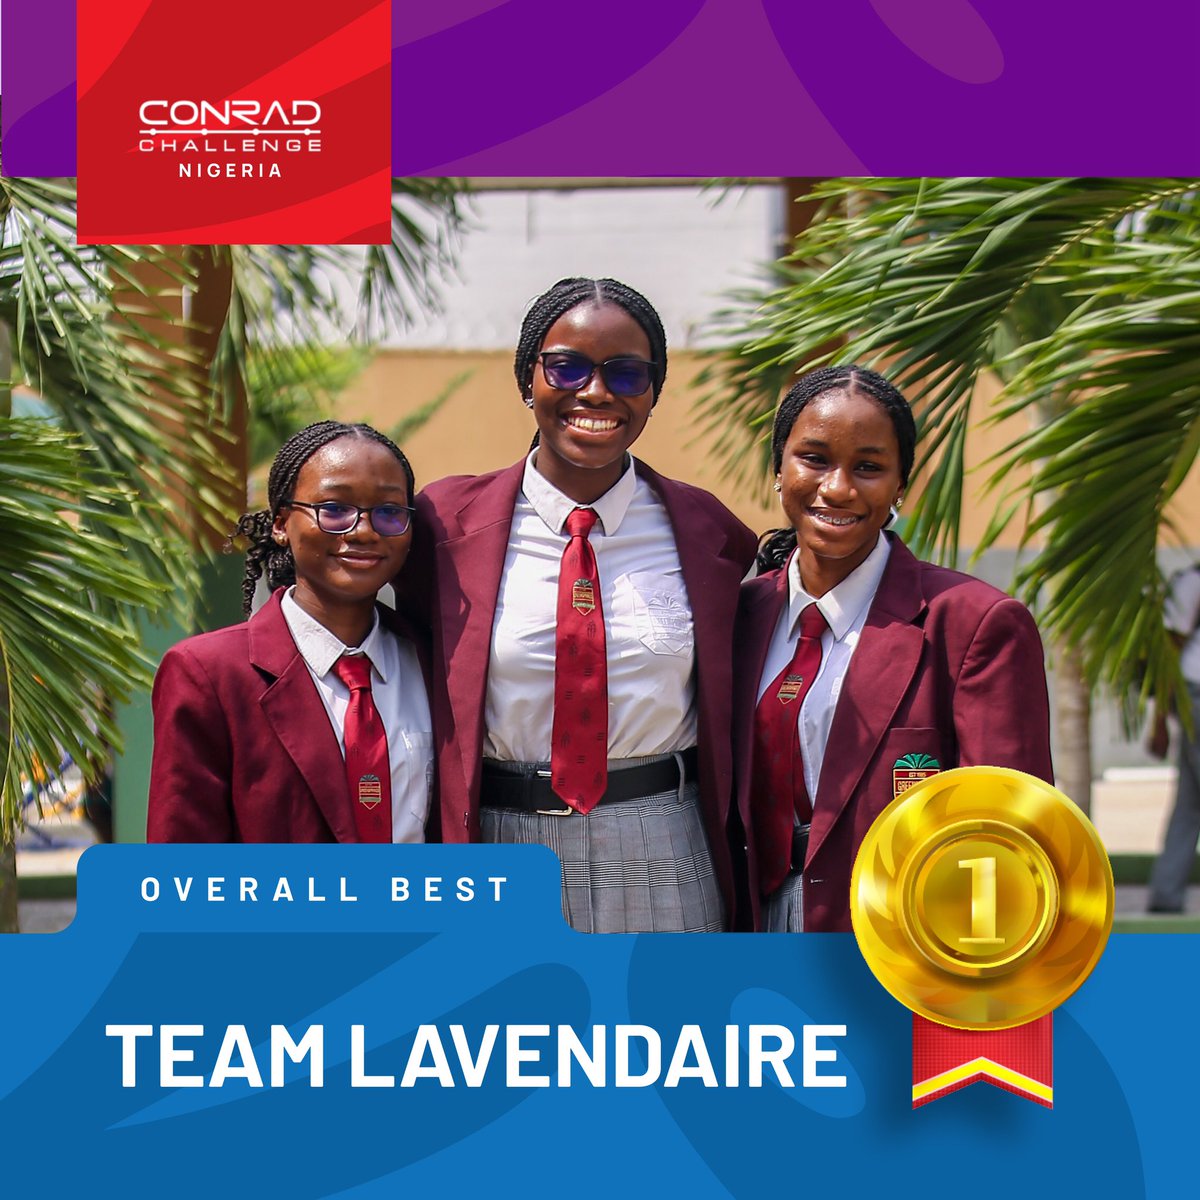 ✨Houston, we are coming!!💃💃
.
Meet the winner of the 2023/2024 Conrad Challenge Nigeria - Team Lavendaire from Greensprings School🥳🎉💃